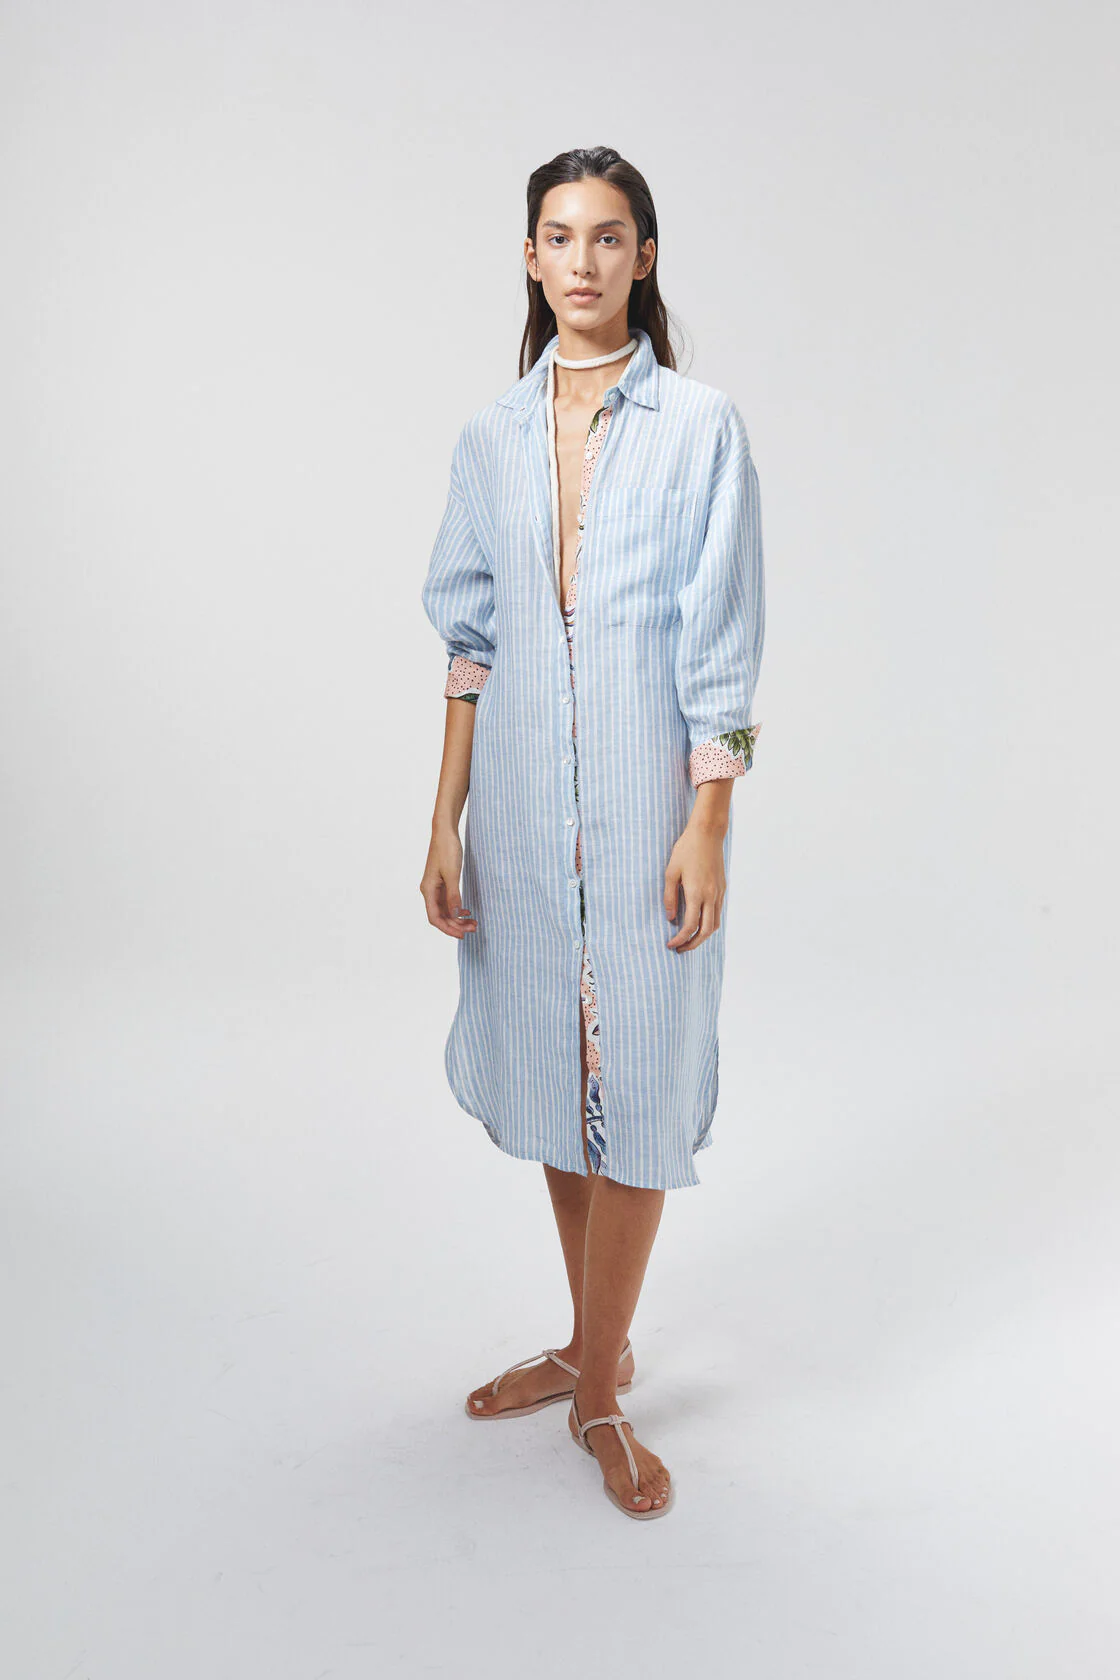 Island Linen Midi Dress - Light Blue and White Stripes with Contrasting Details